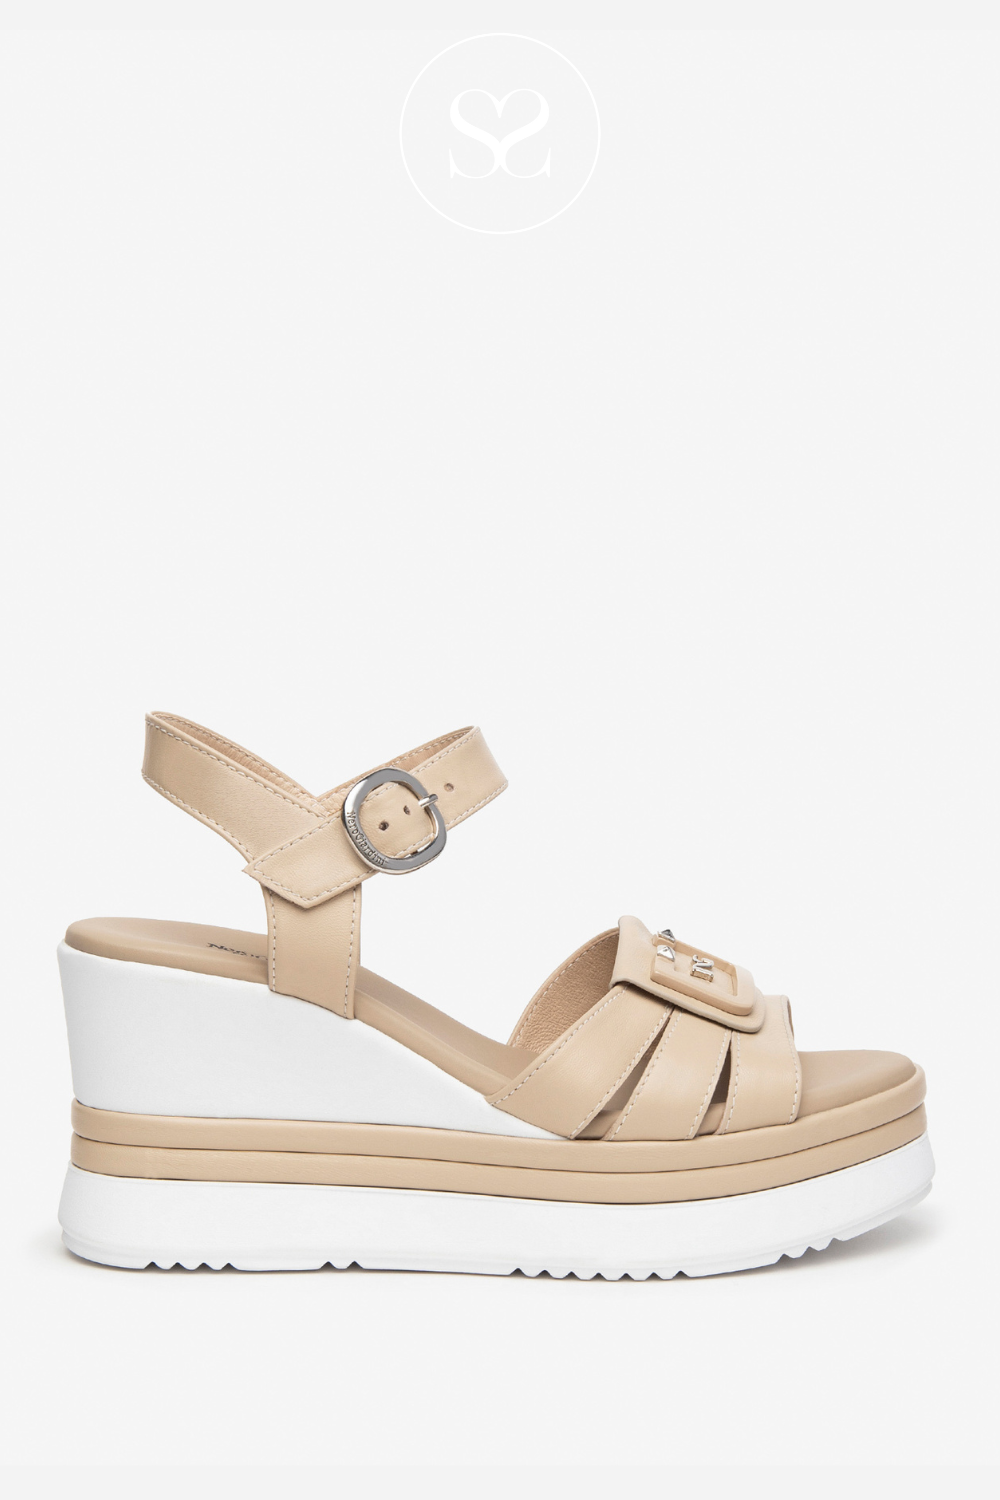 Wedge sandals for Women from Nero Giardini code e410570d in nude